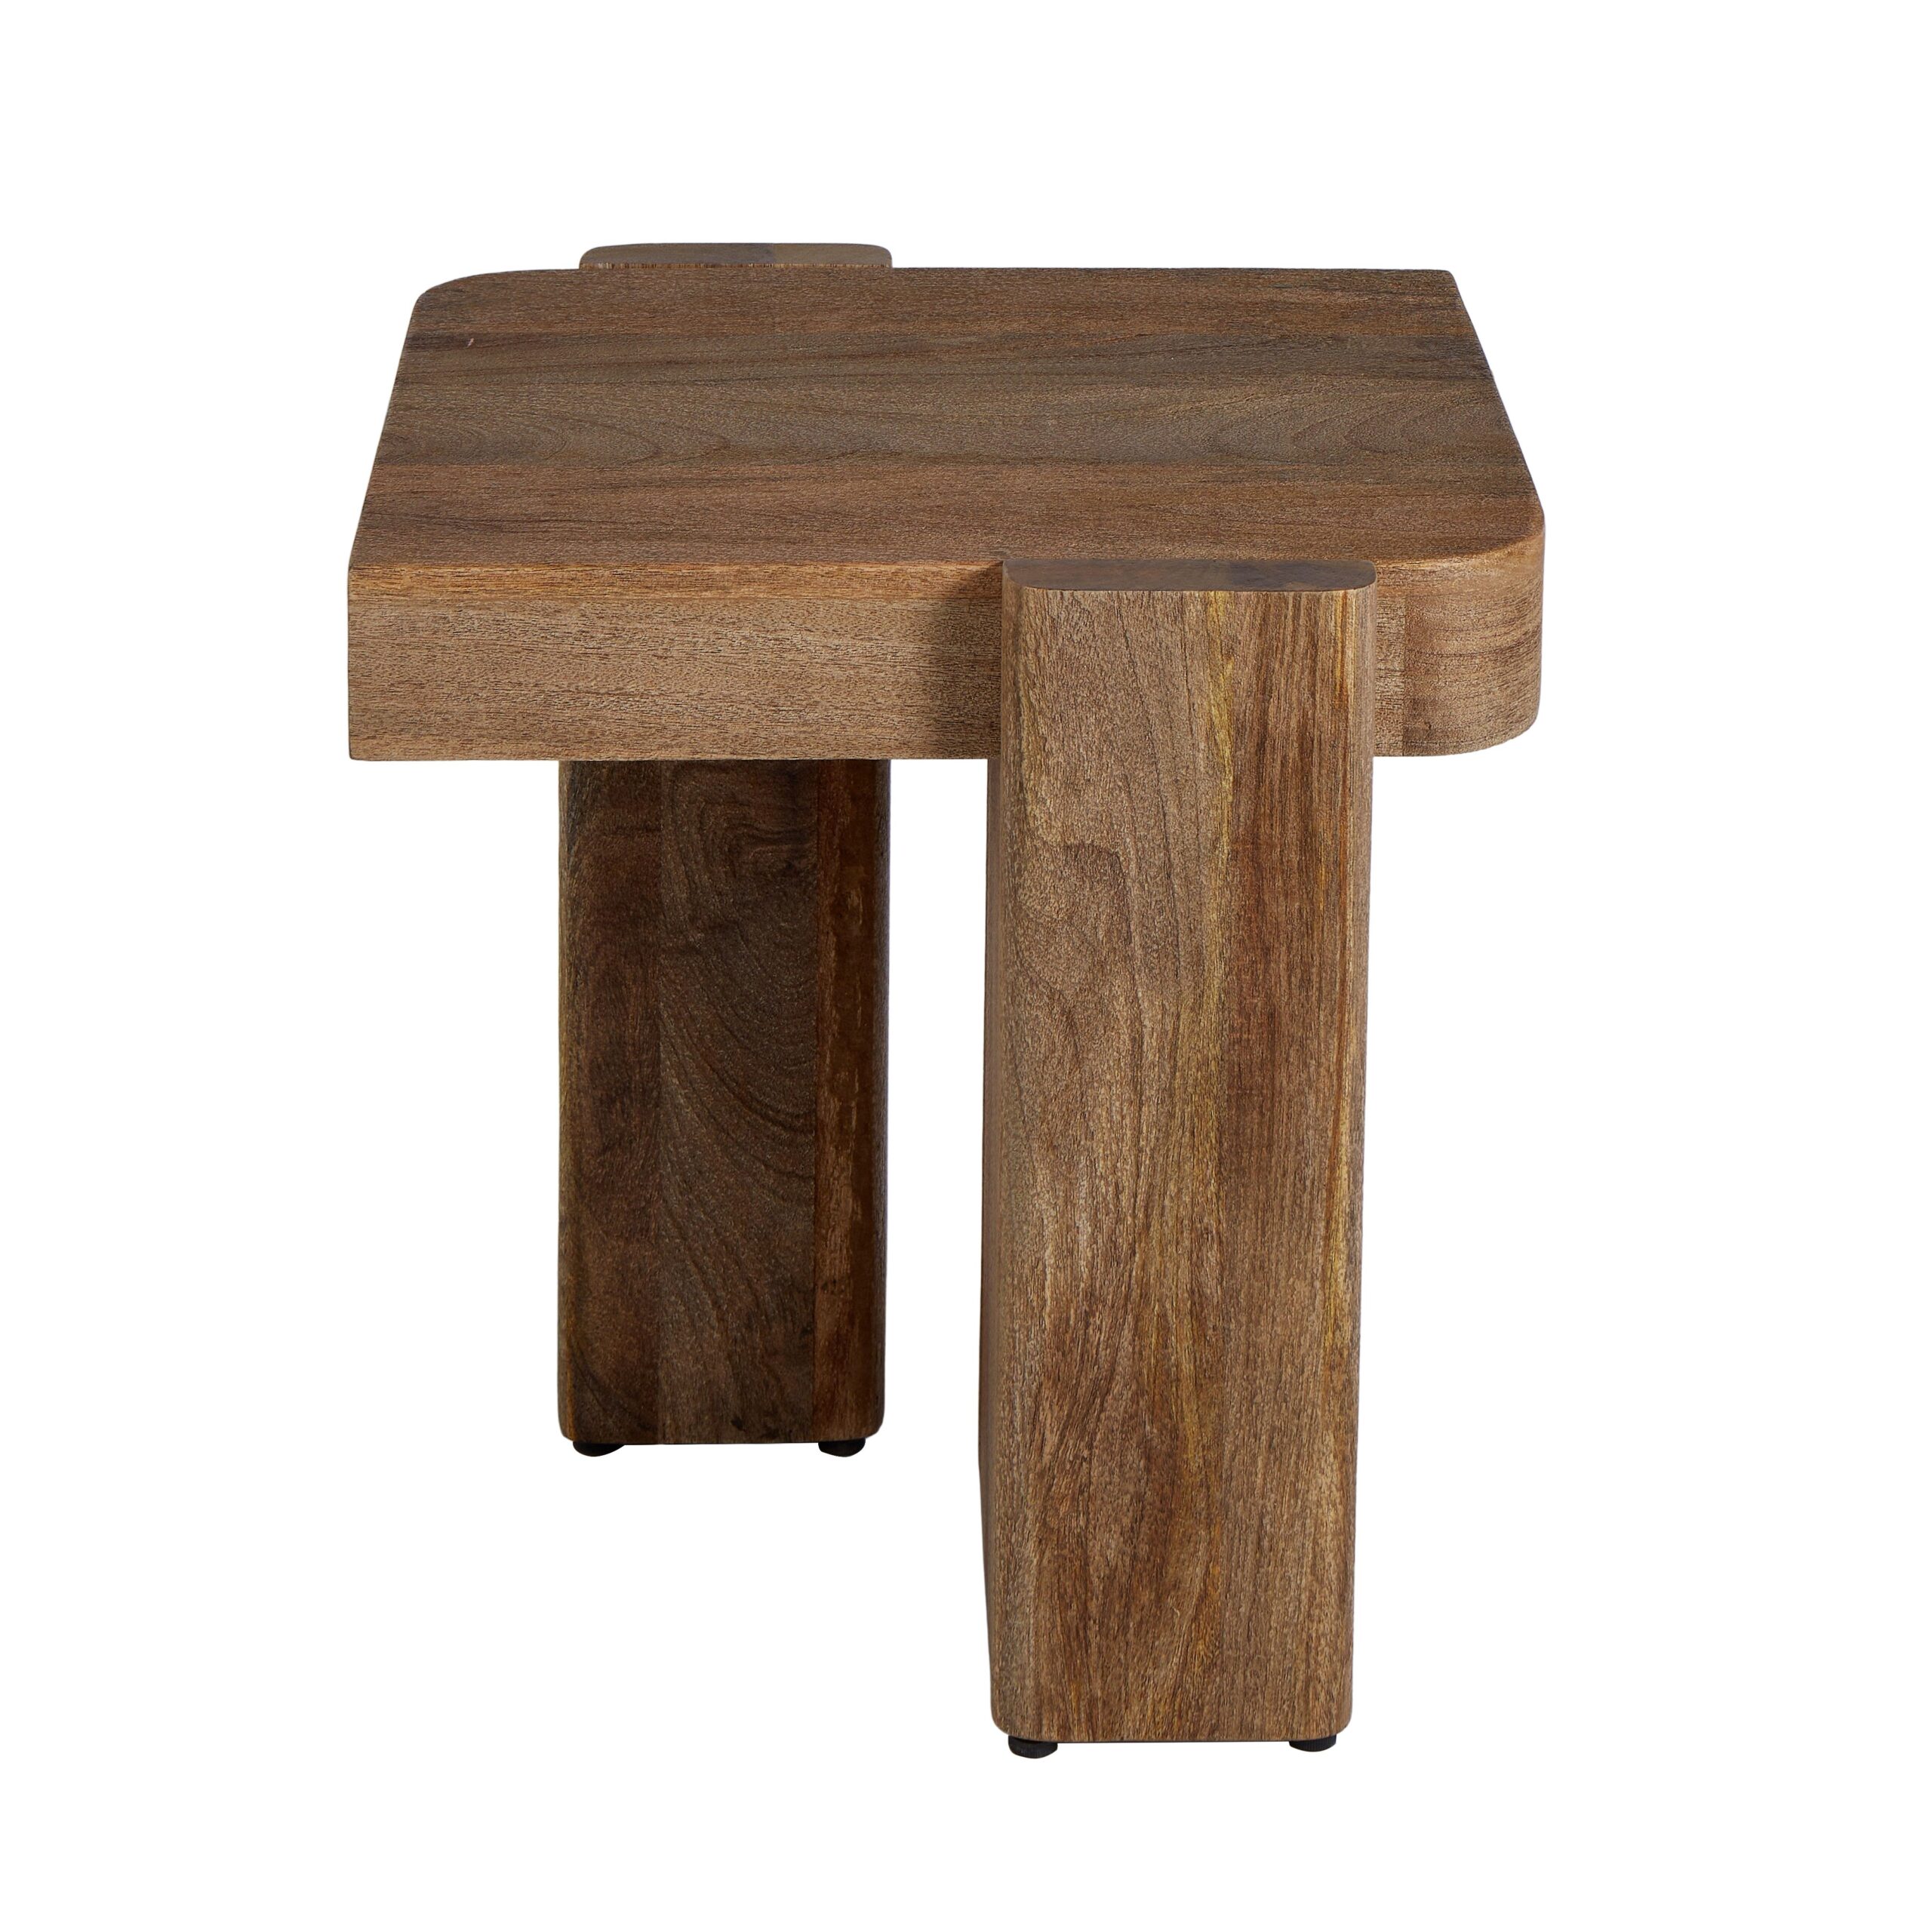 WOODEN BLOCK SIDE TABLE (KD) NATURAL 50X50X50CM